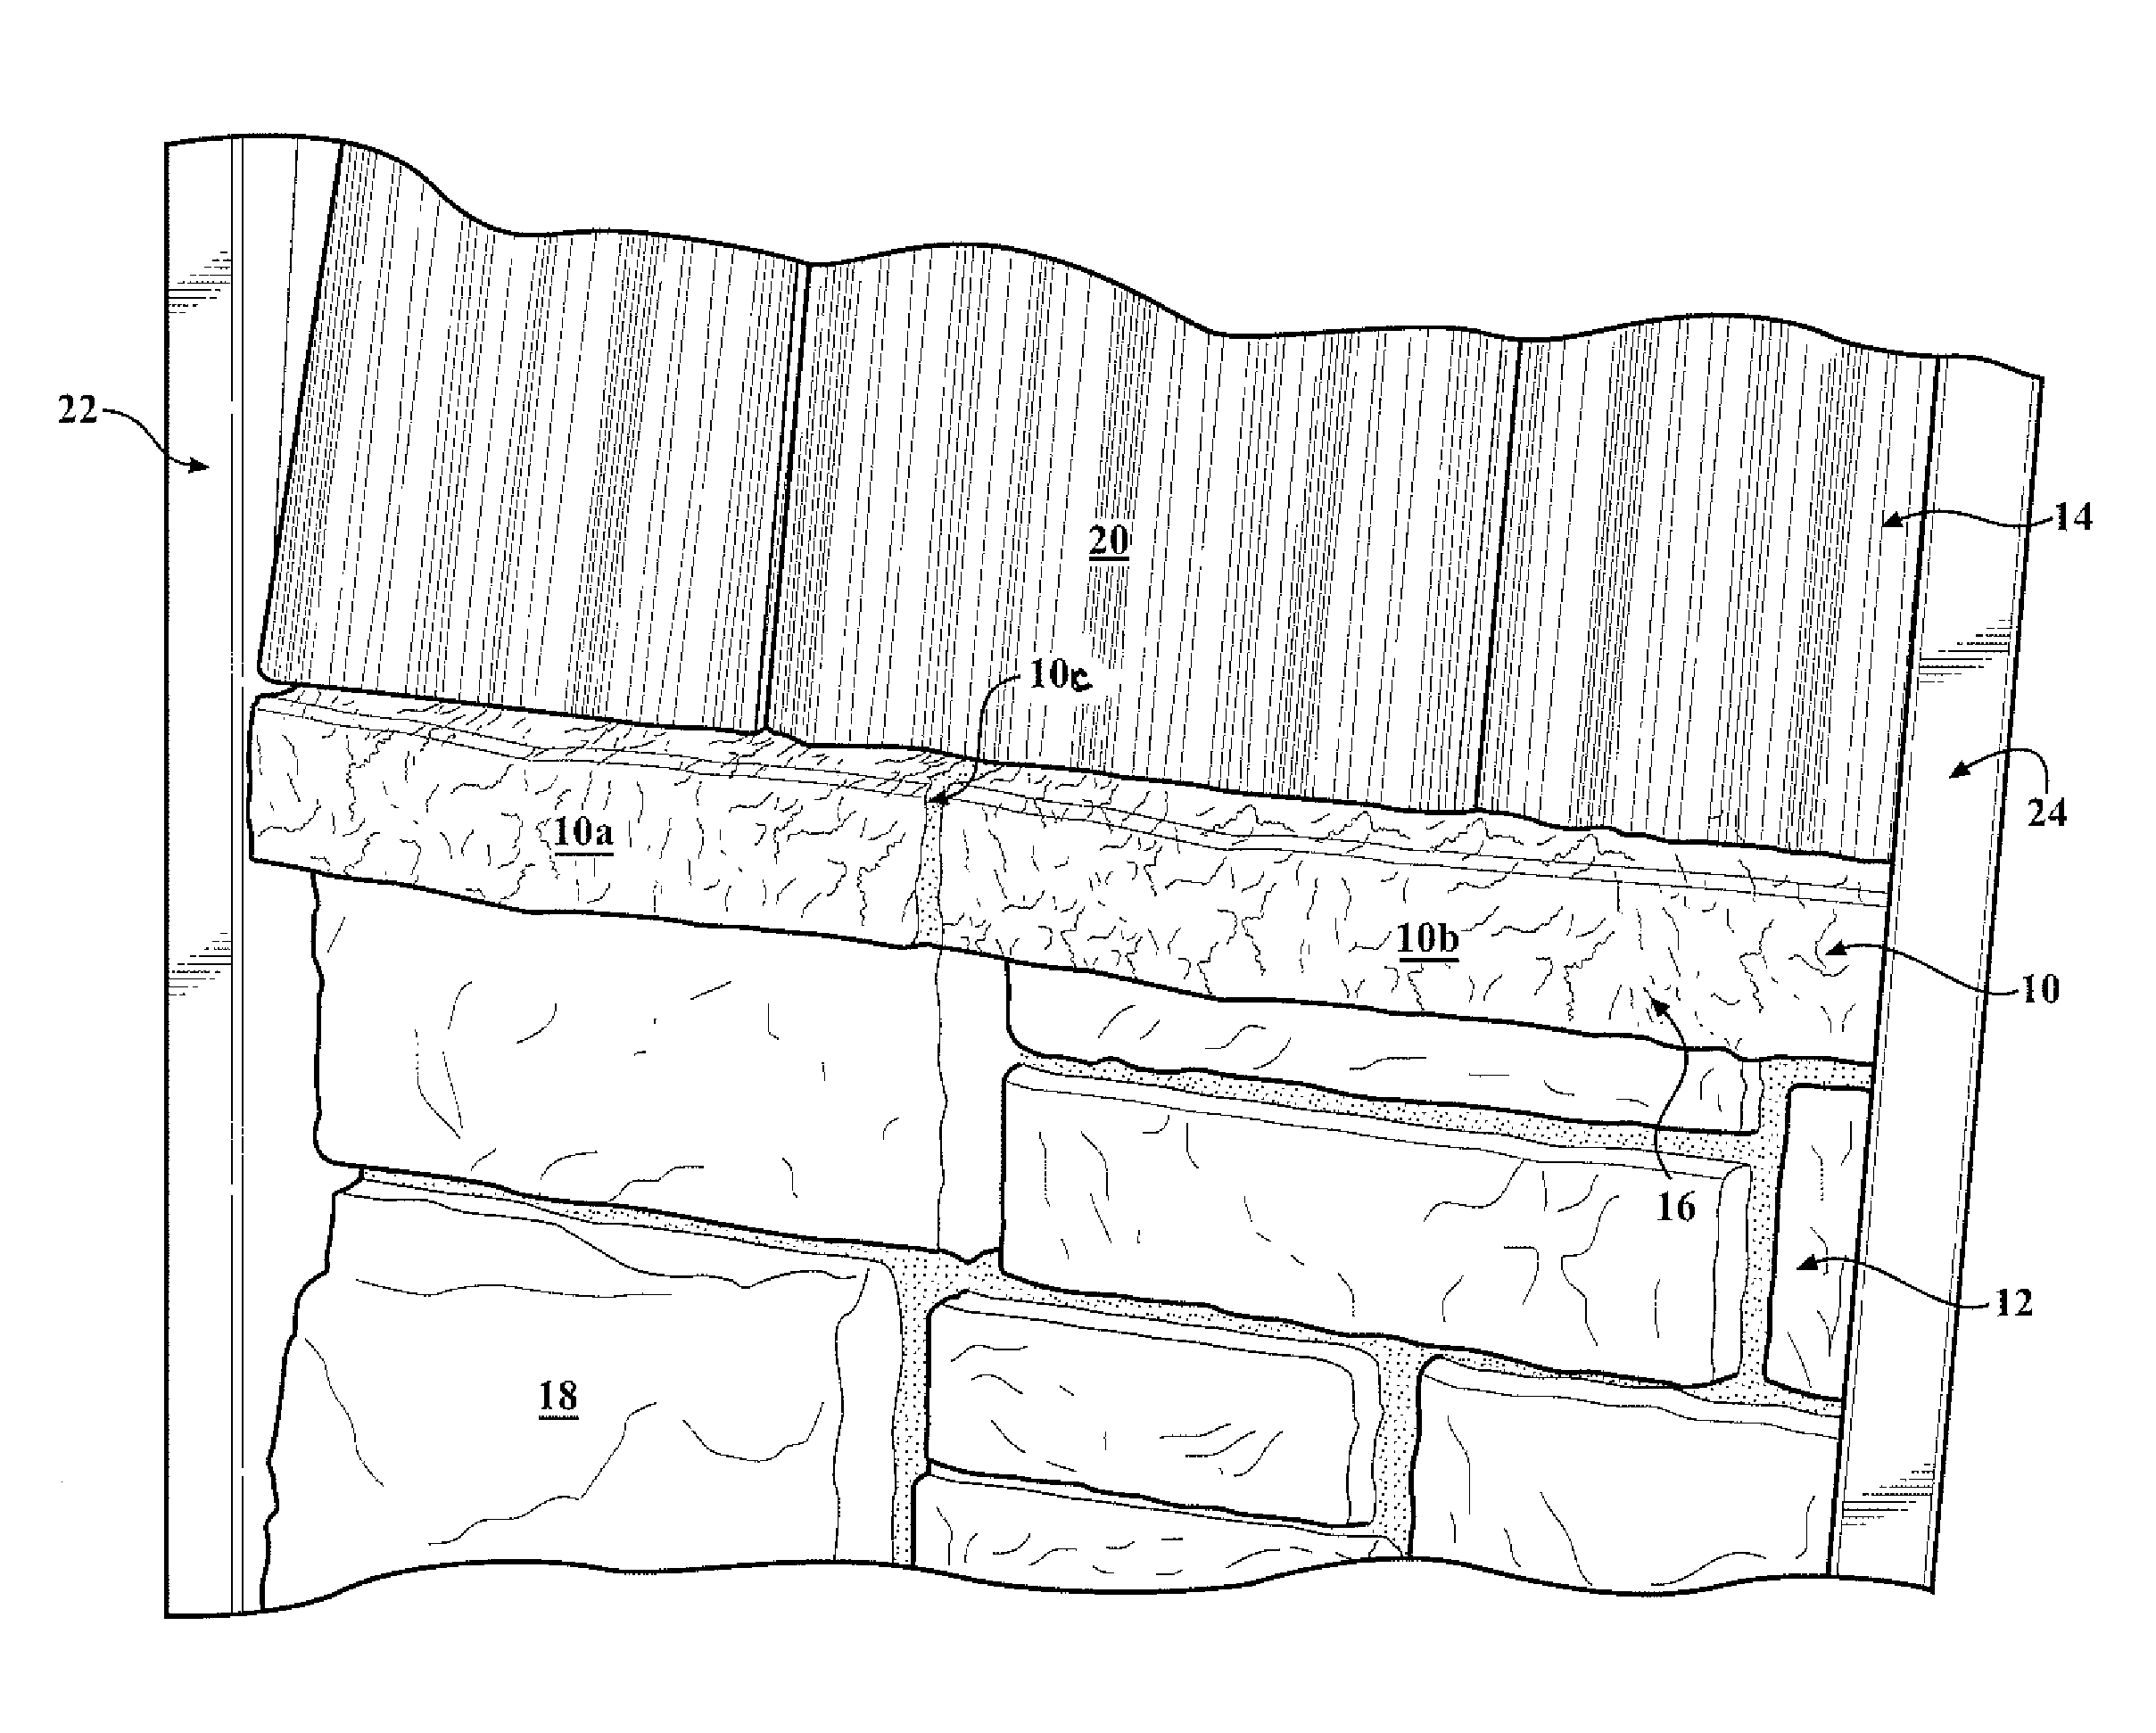 System and method for manufacturing a rough textured molded plastic siding product